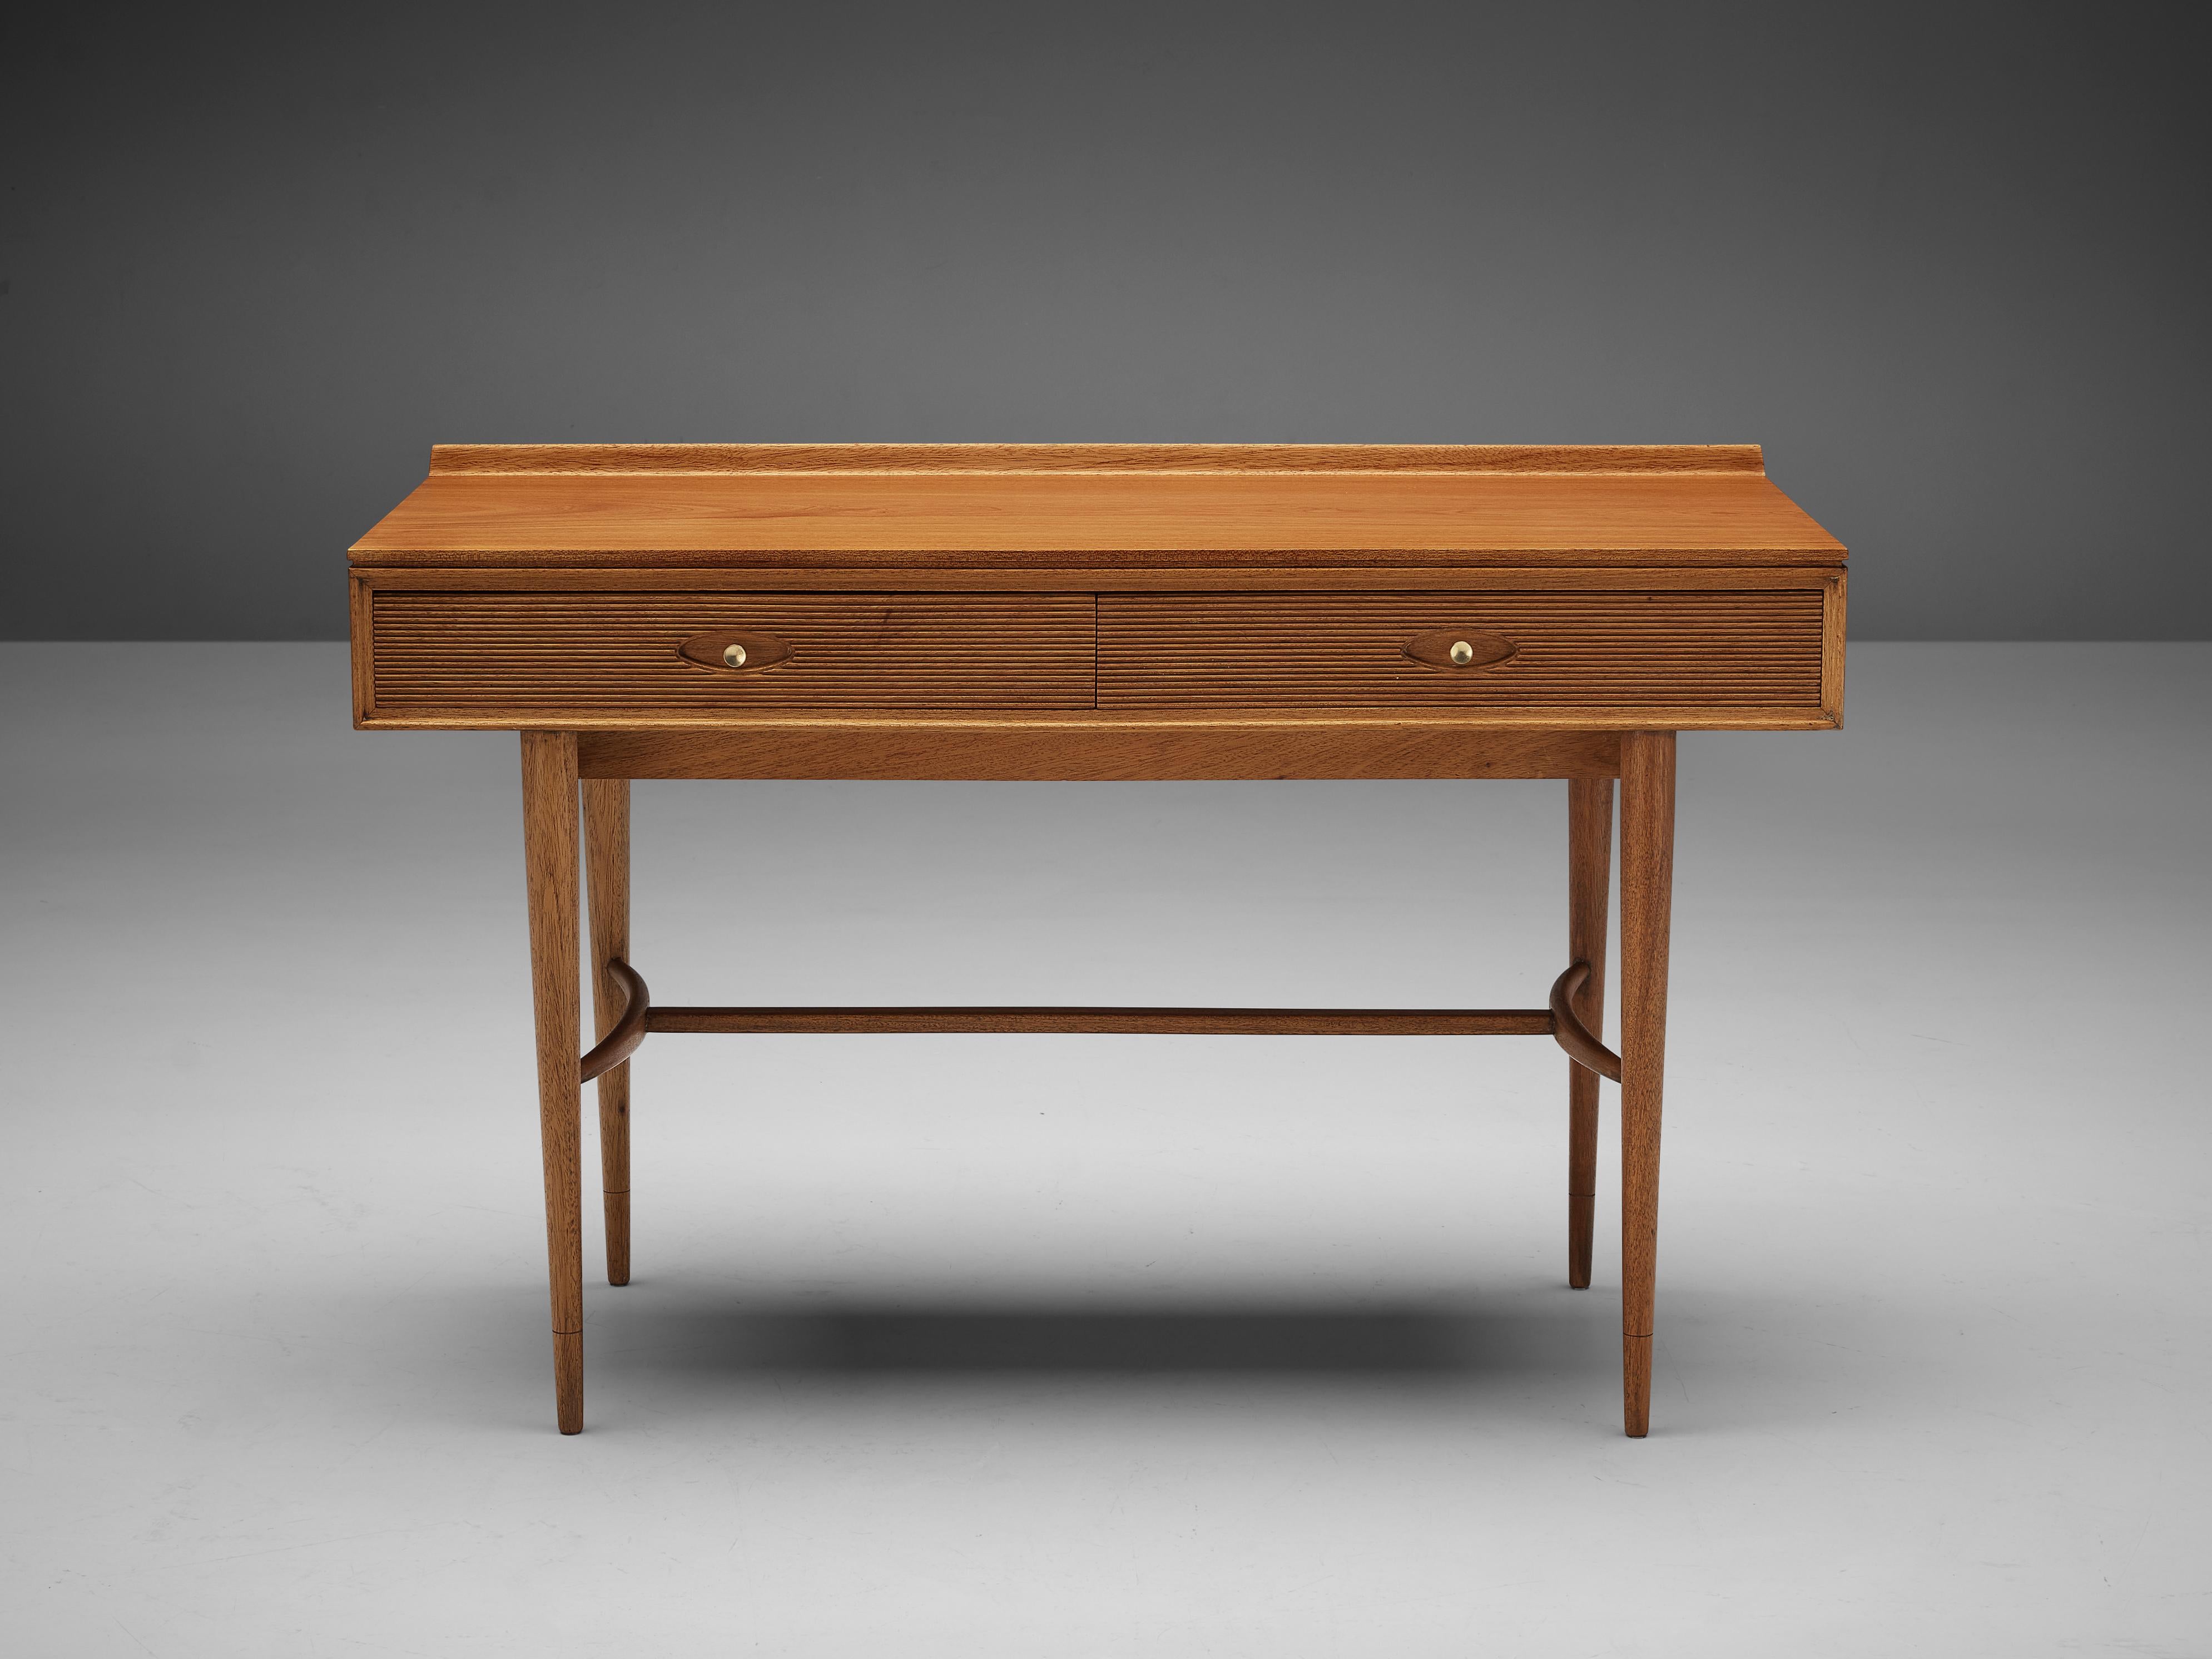 Robert Heritage, desk with two drawers, Ceylon satinwood, brass, United Kingdom, 1960s

Elegant writing table by British designer Robert Heritage. The desk features two drawers with horizontally carved lines that the surround an oval field with the